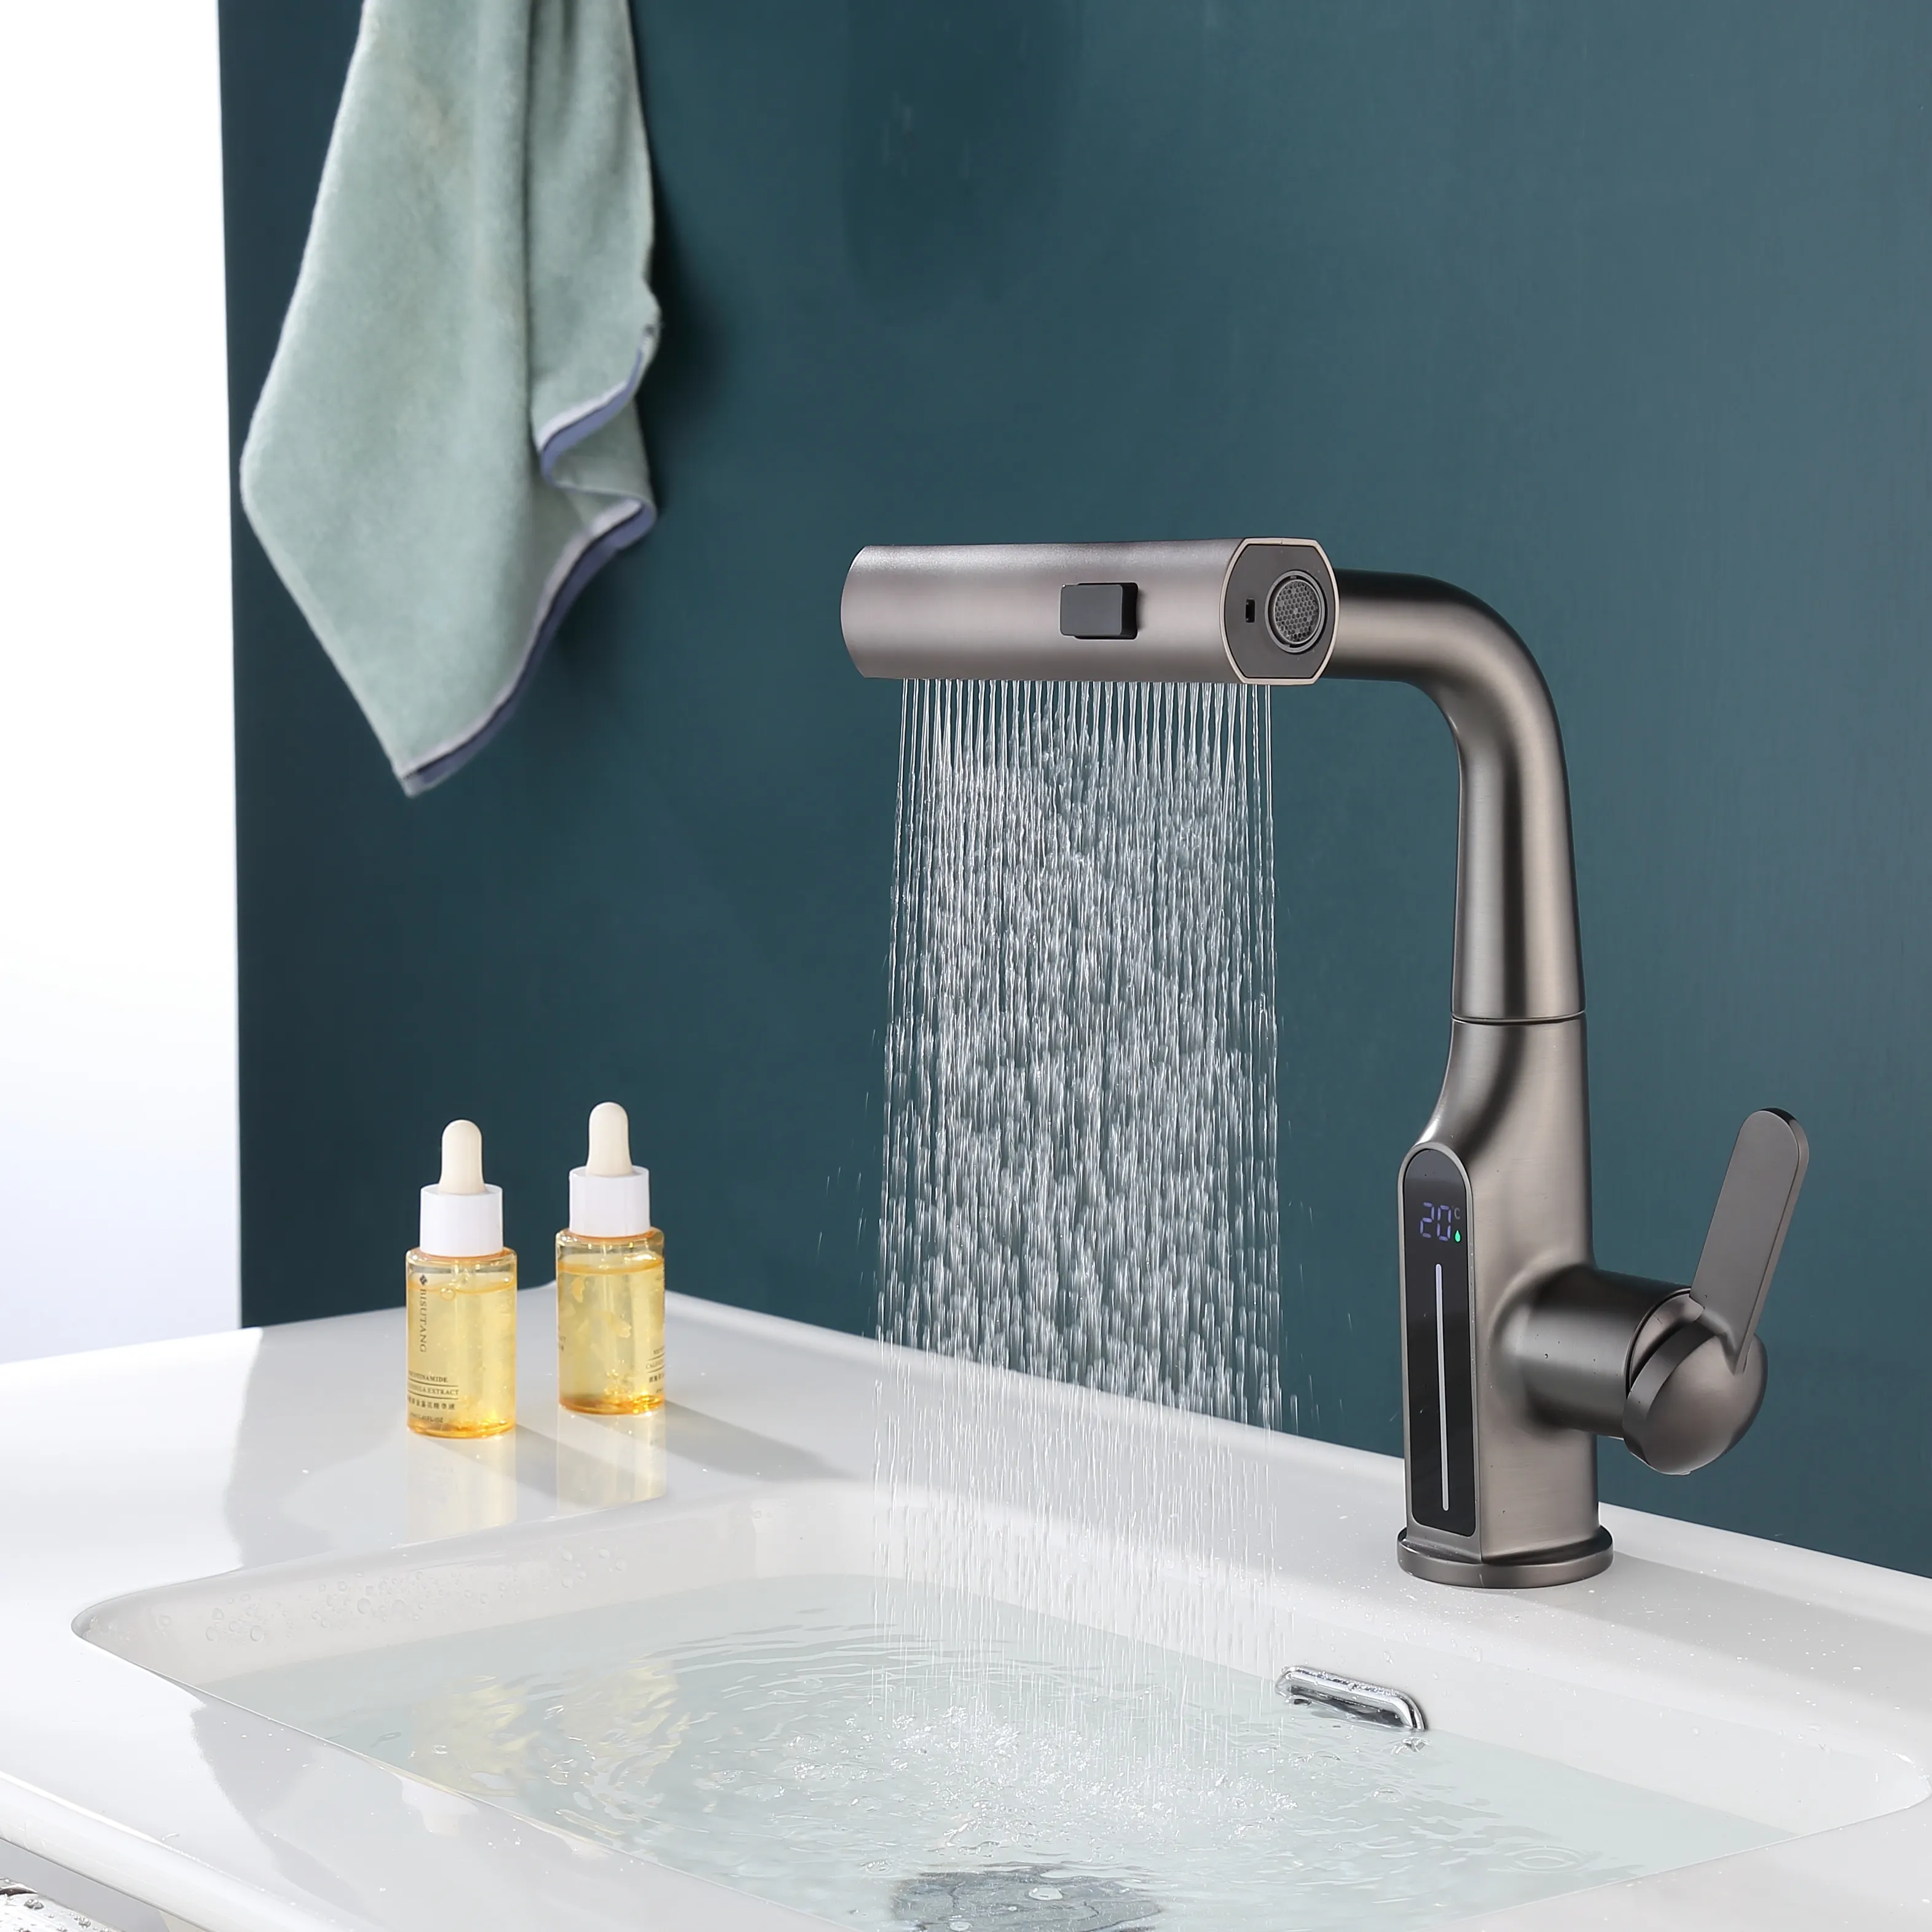 Smart Toilet Washbasin Sink Water Pull Out Spray Waterfall Kitchen Faucet Double Outlet Water Tap With Digital Display